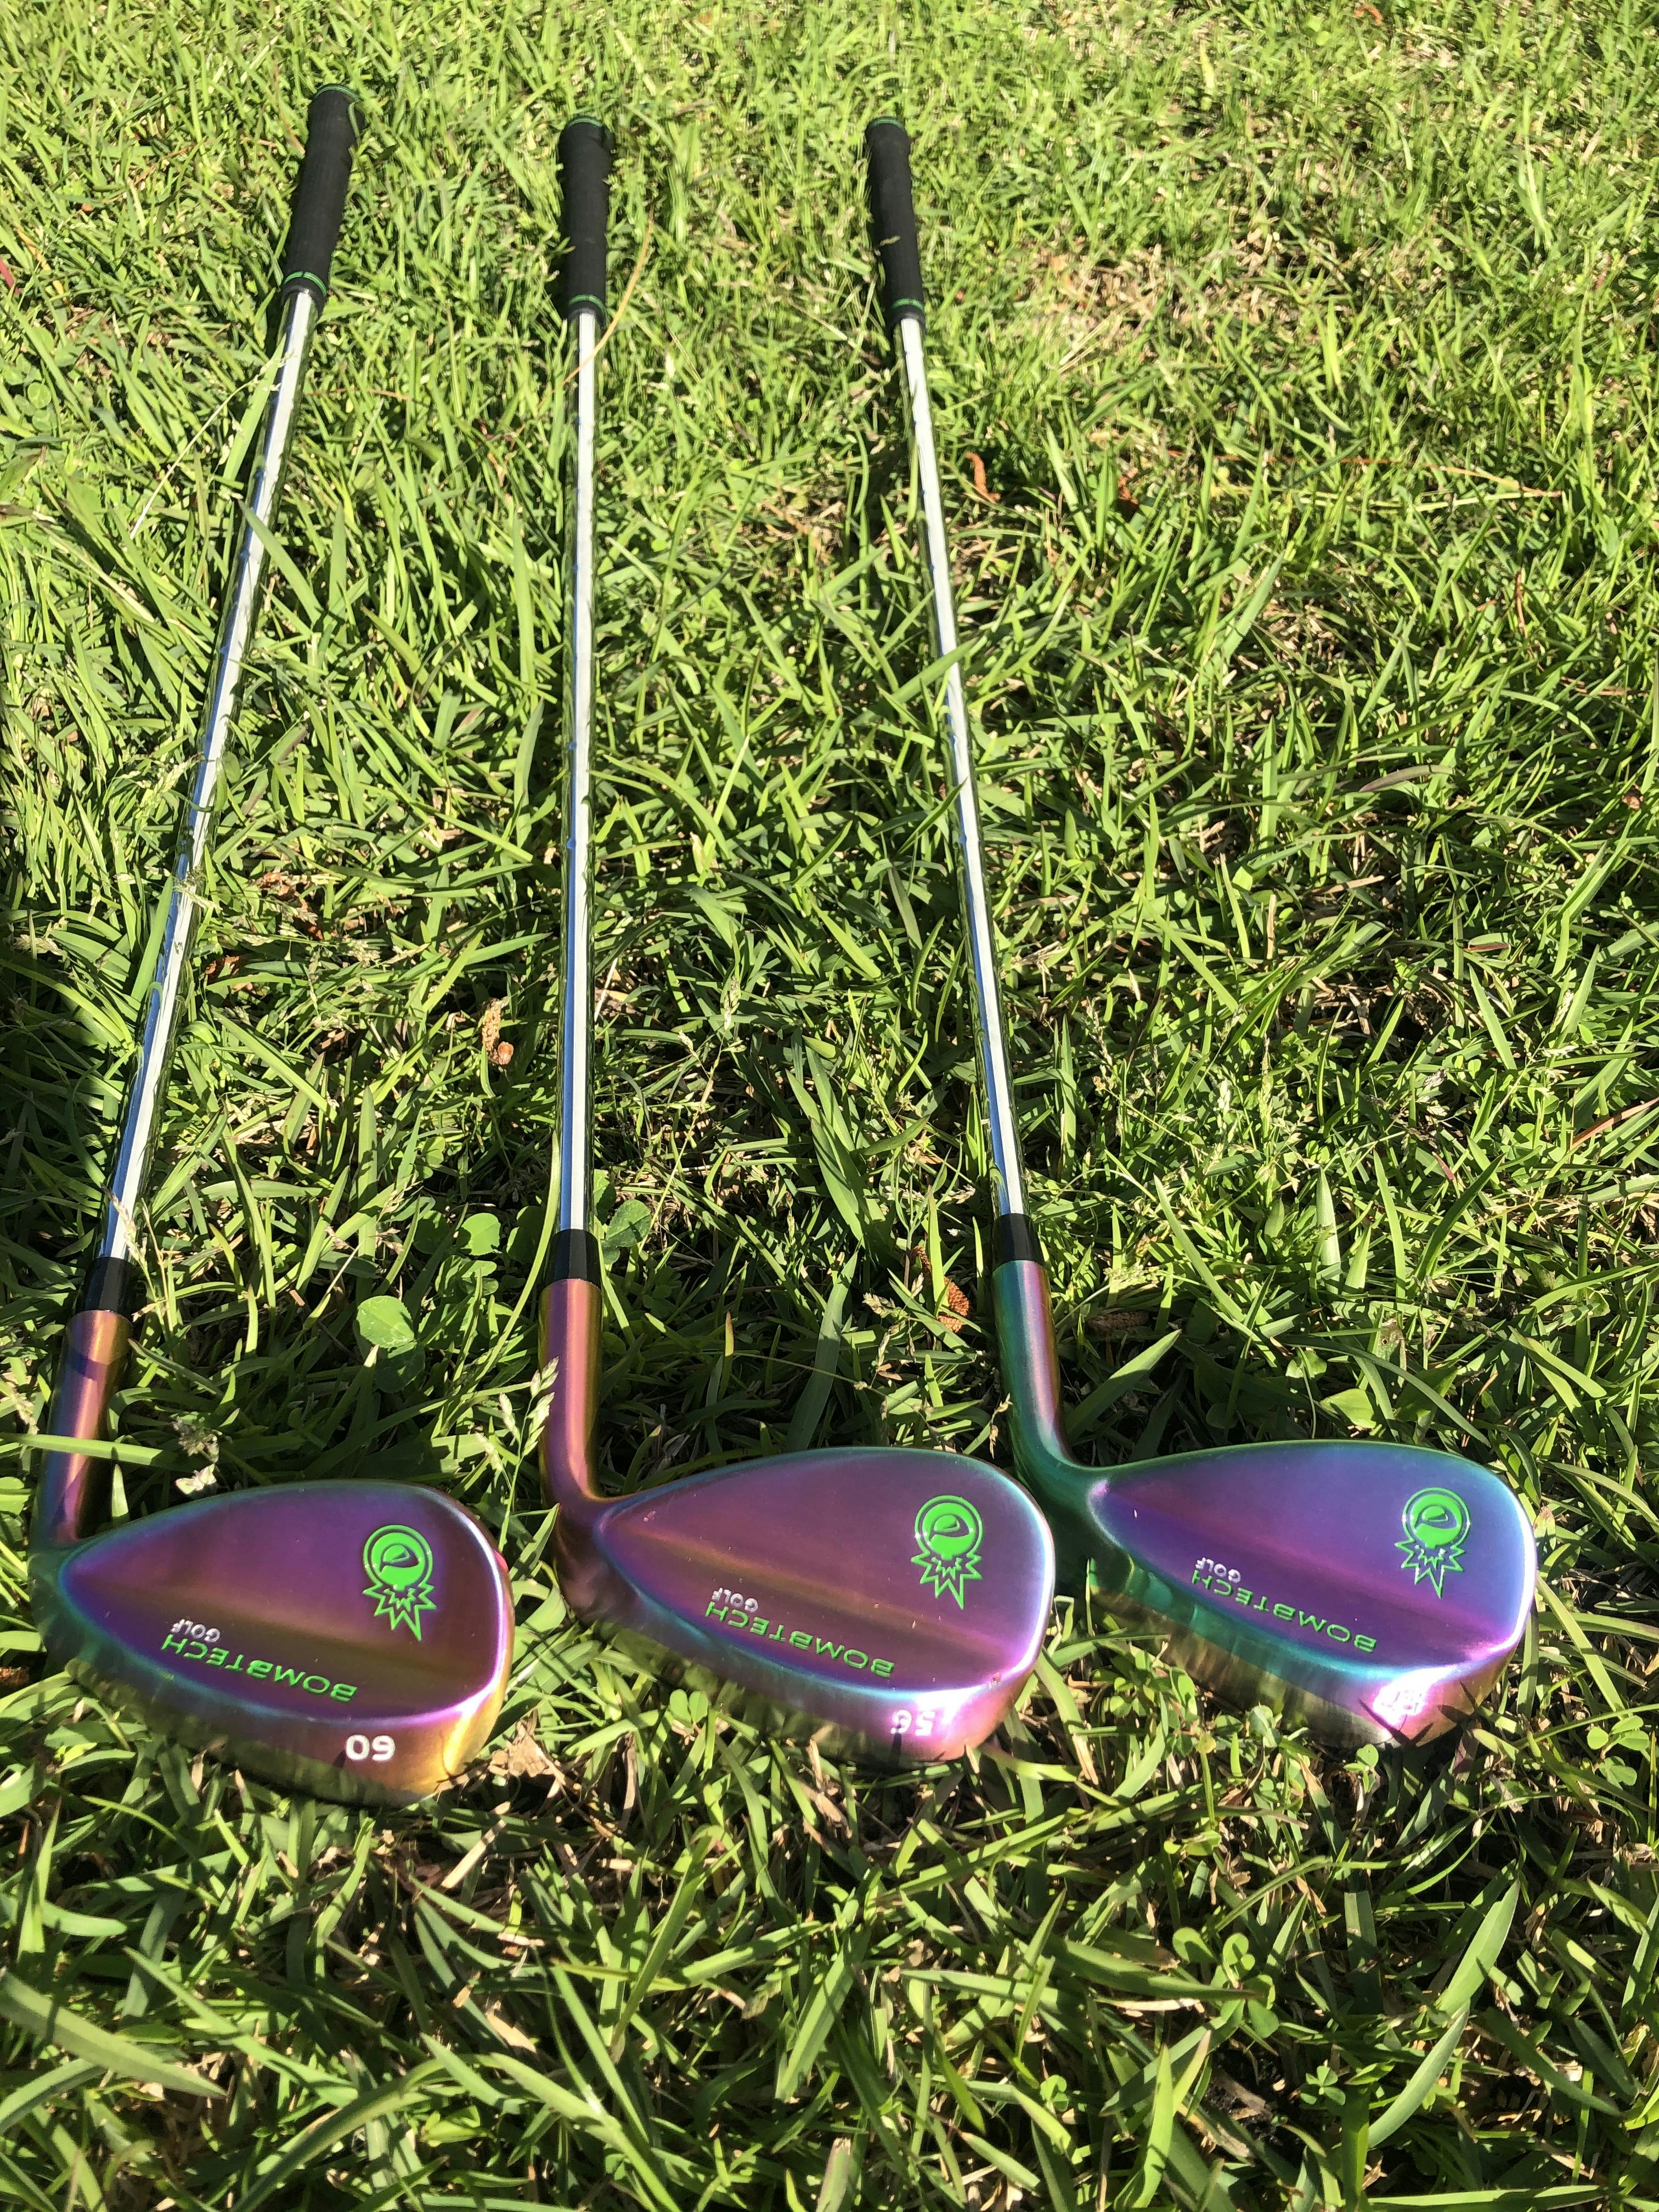 Are bombtech golf club Good for Beginners?